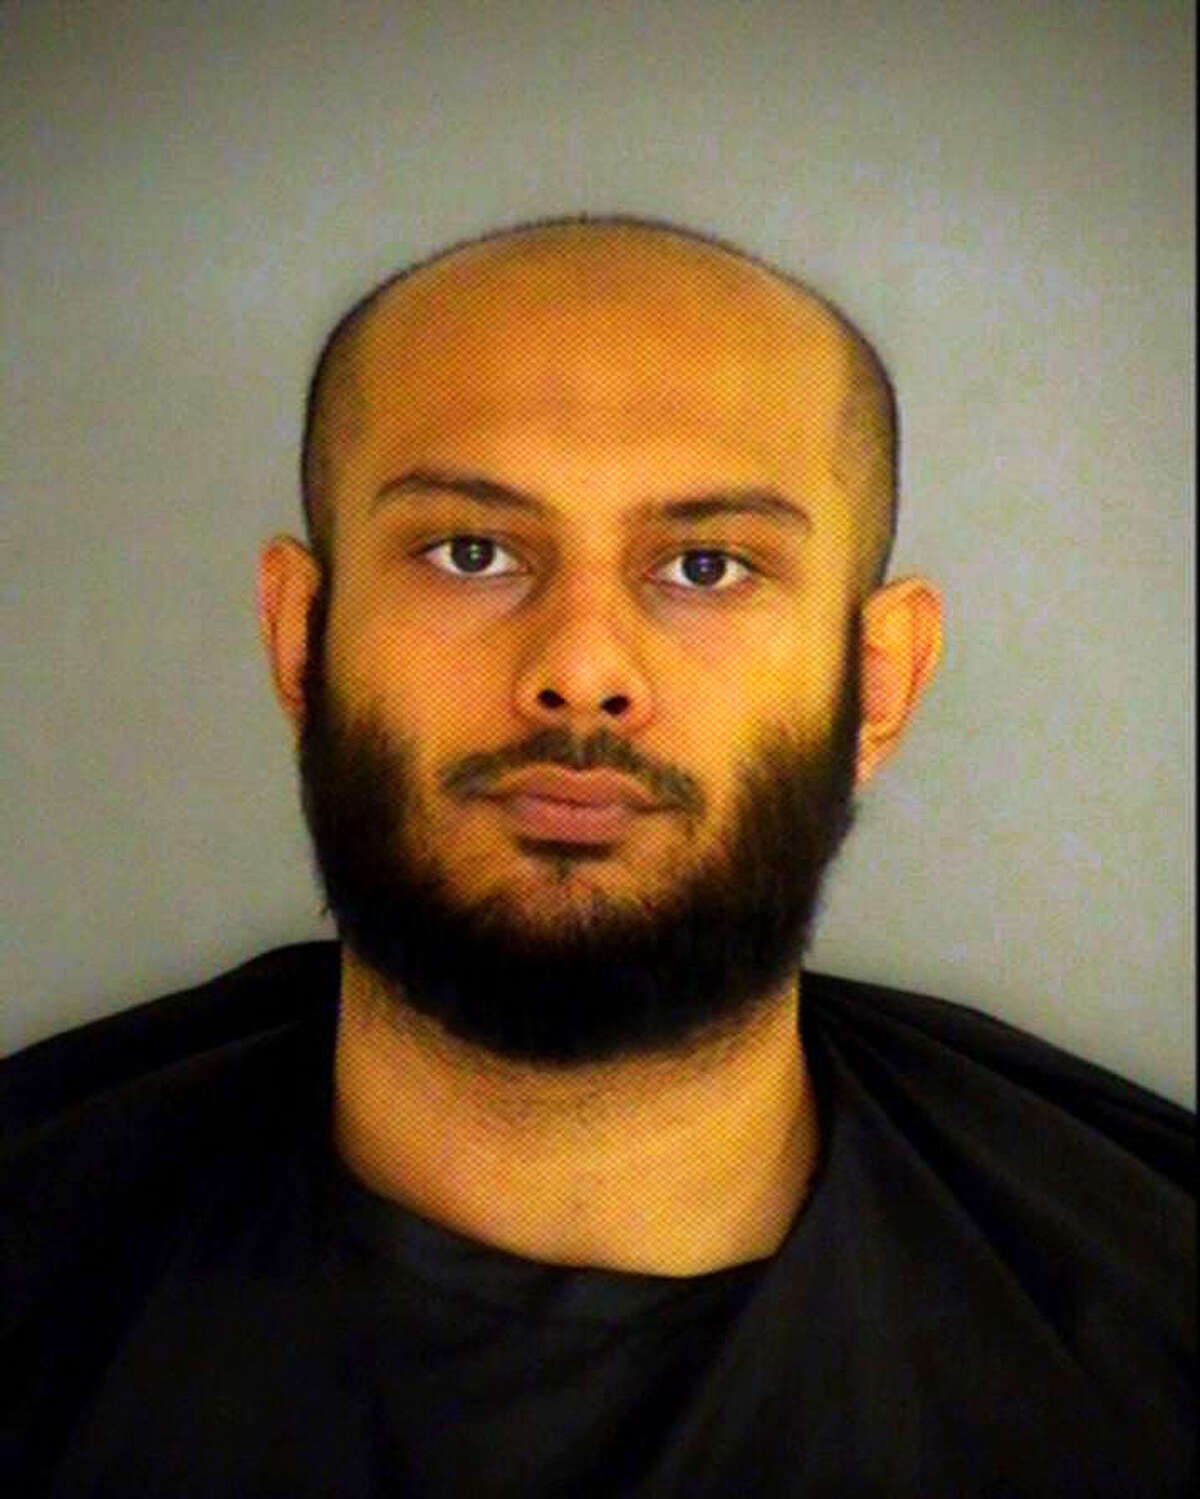 Rahatul Ashikim Khan The Central Texas Joint Terrorism Task Force on Tuesday arrested Rahatul Ashikim Khan of Round Rock and Michael Todd Wolfe of Austin. Both 23, they are charged with conspiring to provide material support to terrorists, according to the Department of Justice.